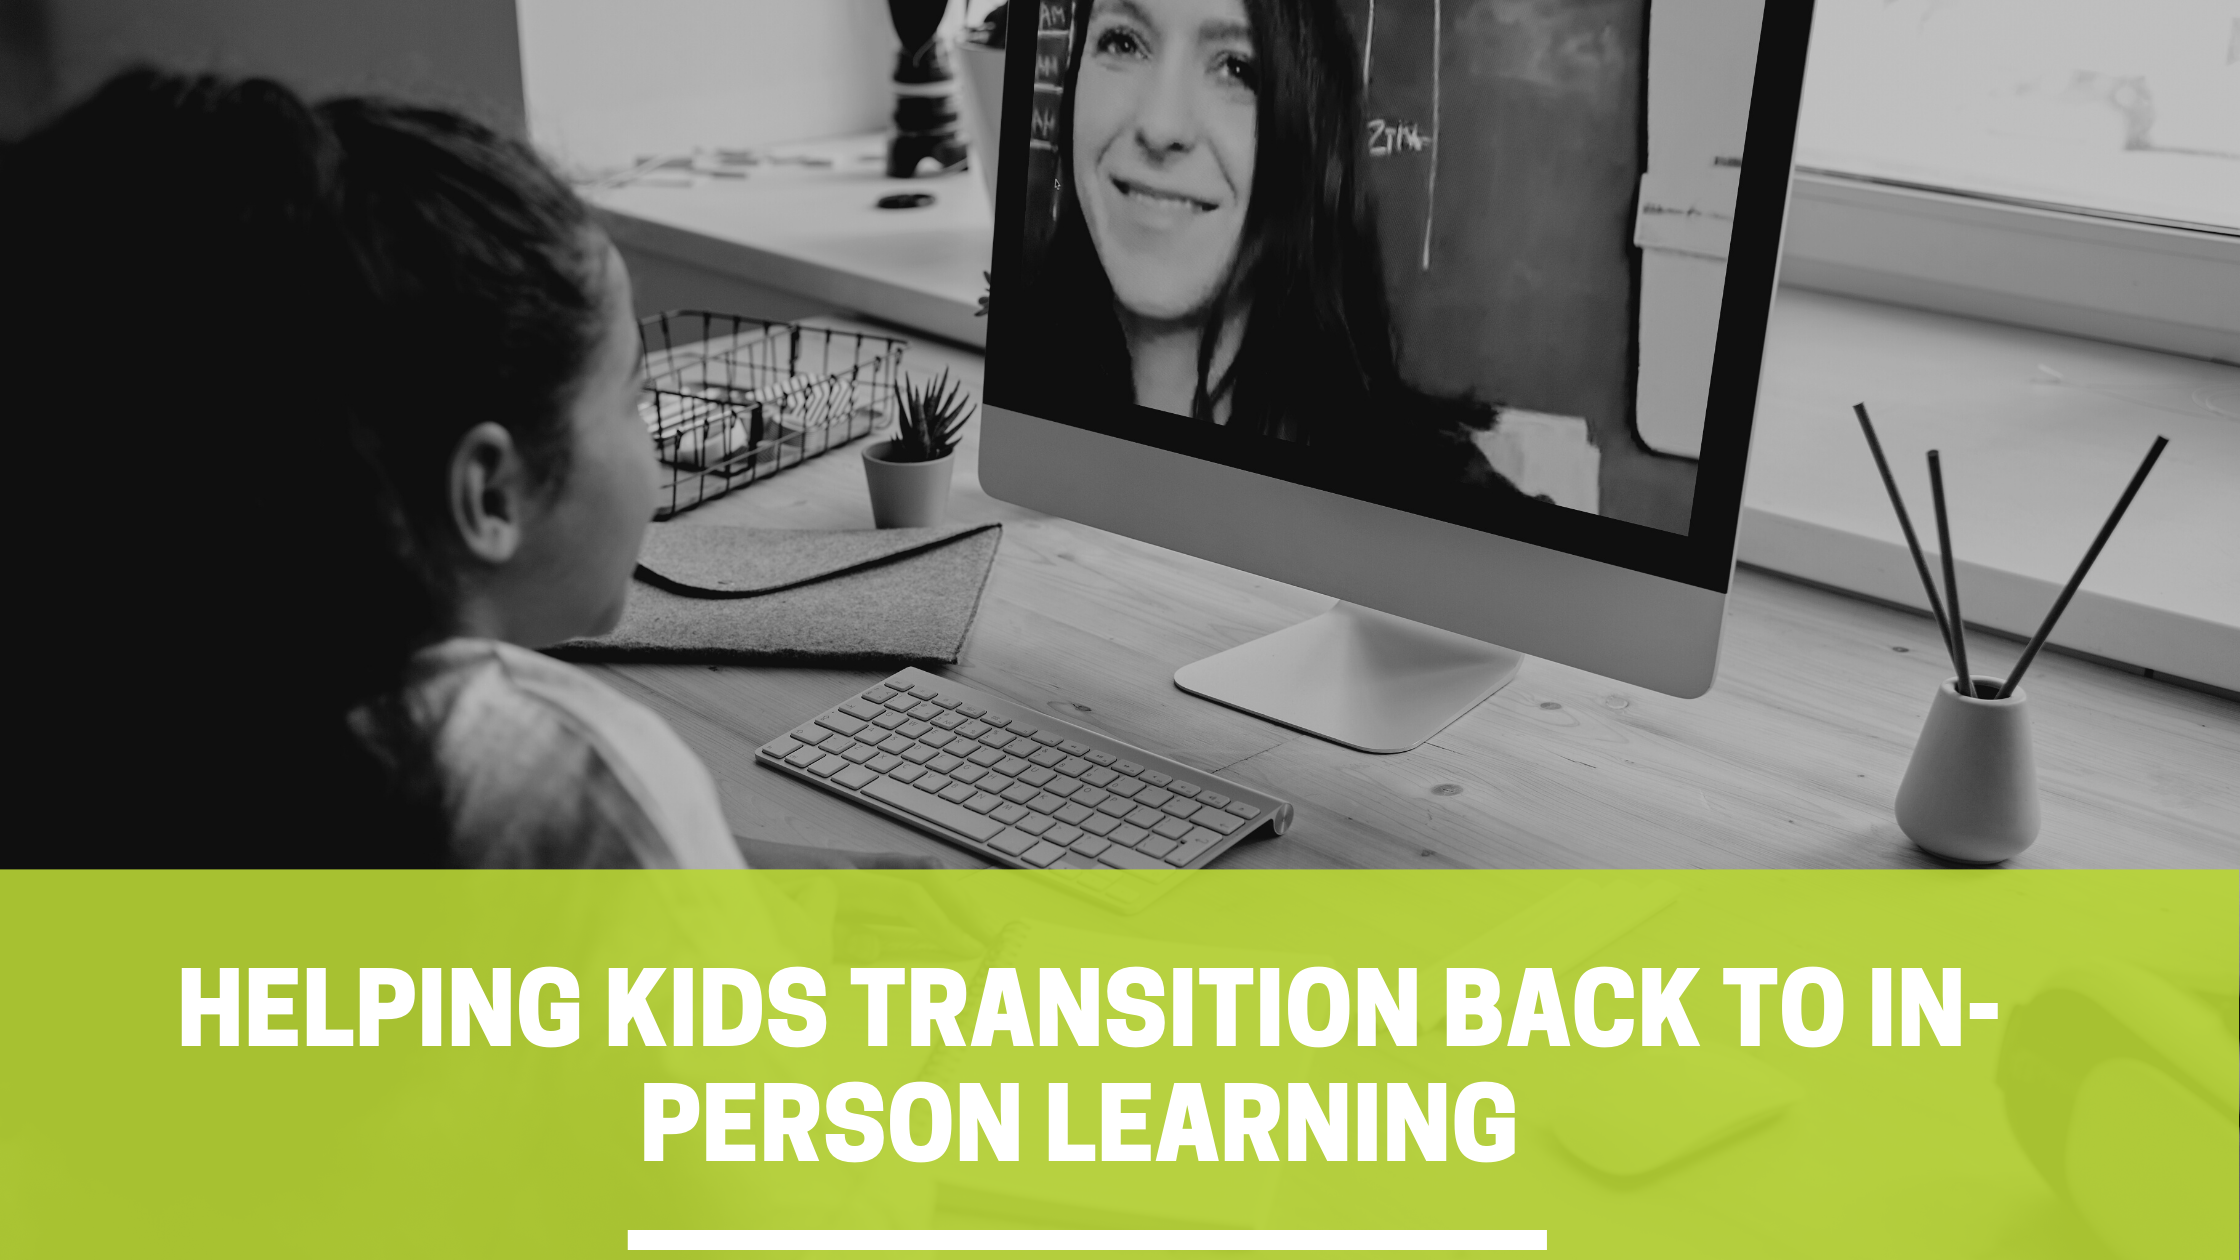 Helping kids transition back to in-person learning